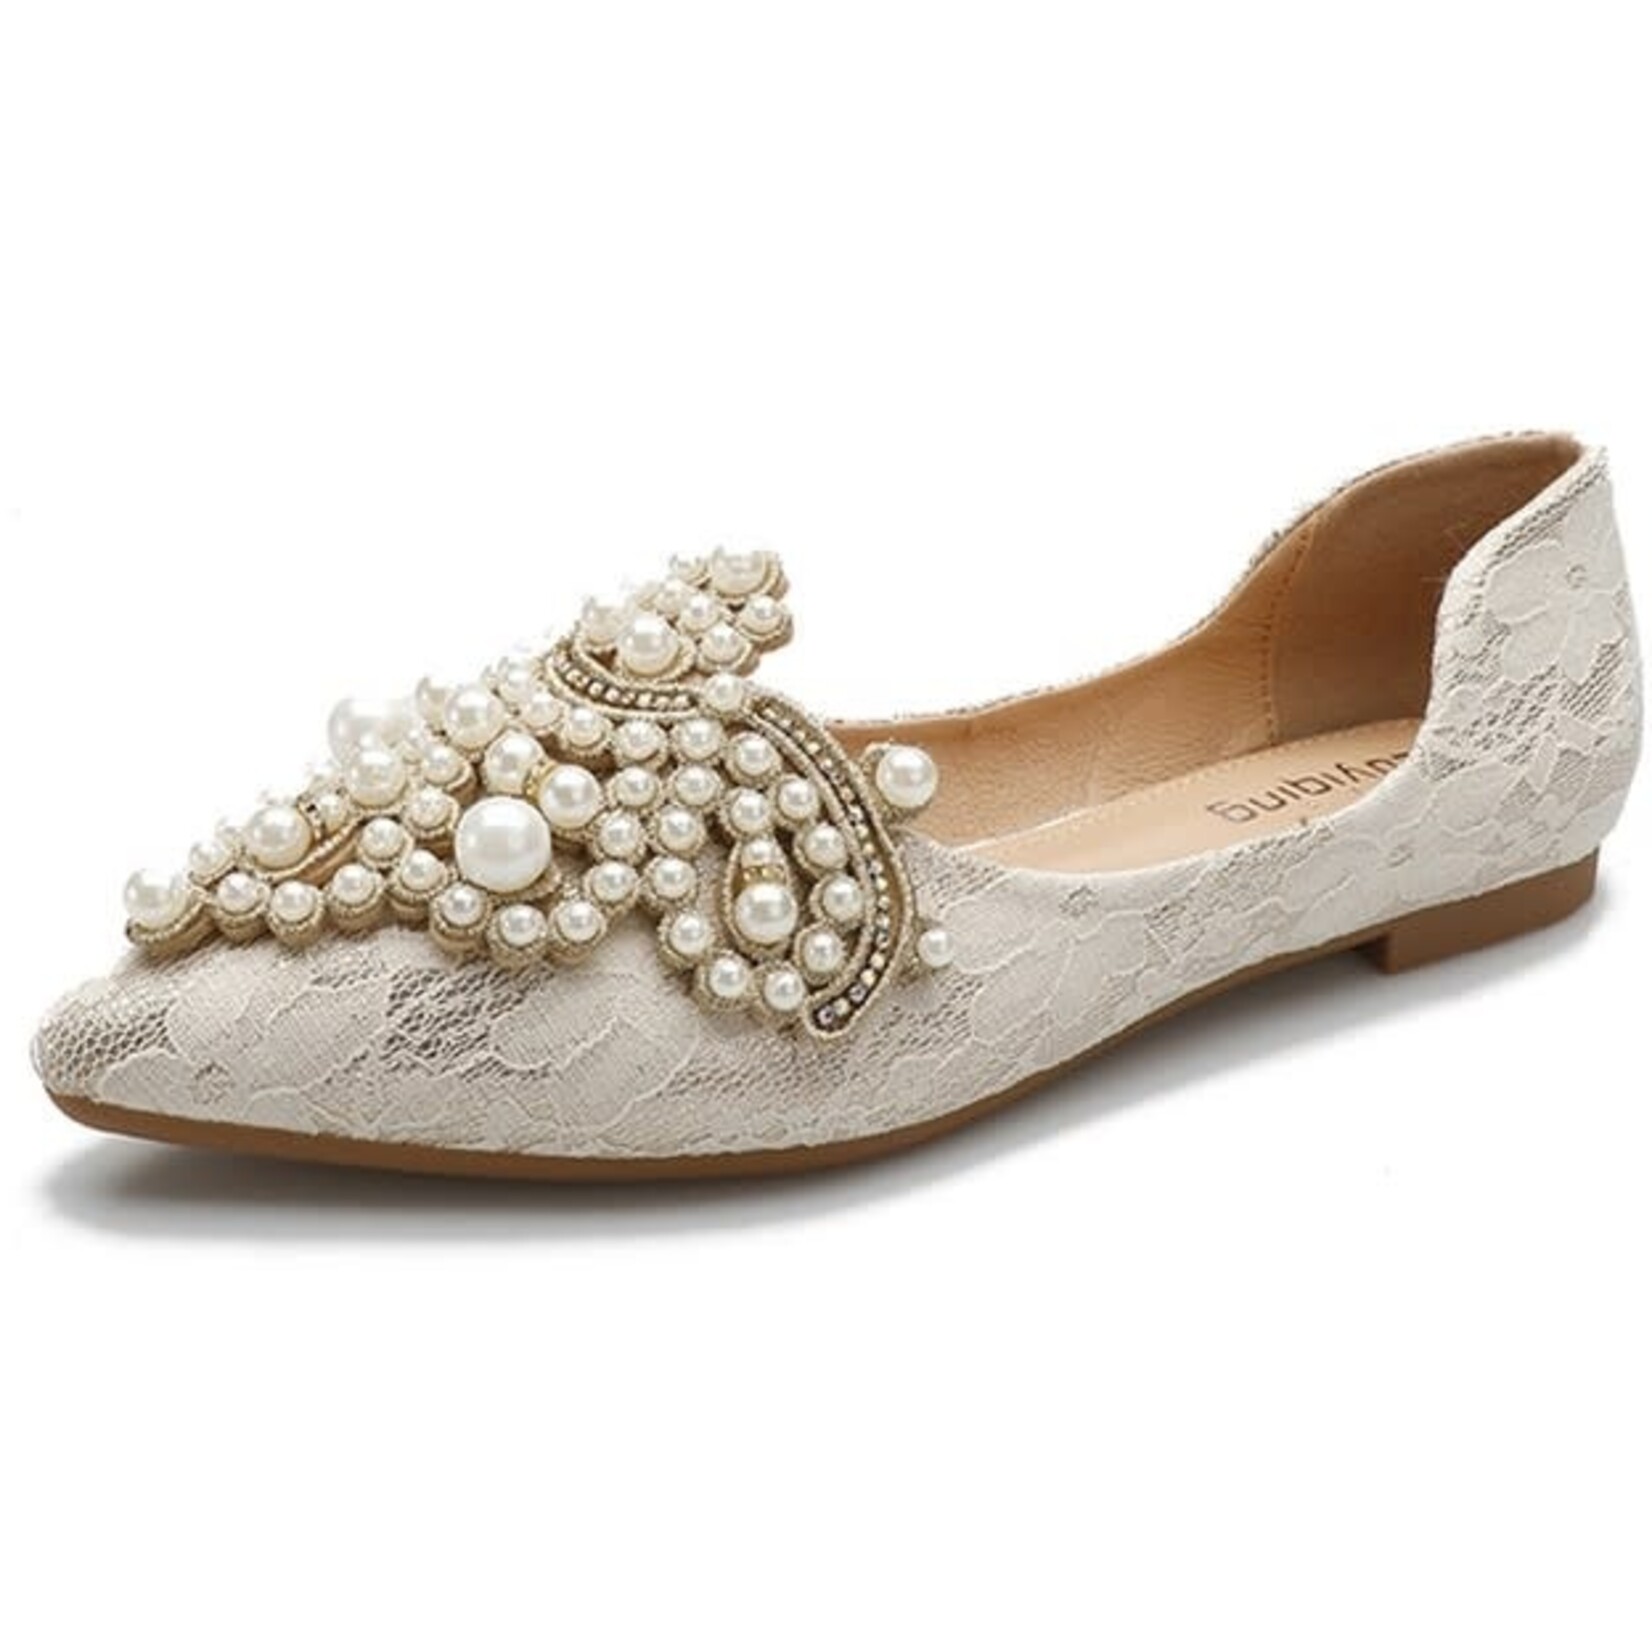 Faux Pearl Decor Lace Flat Shoes In Apricot 7